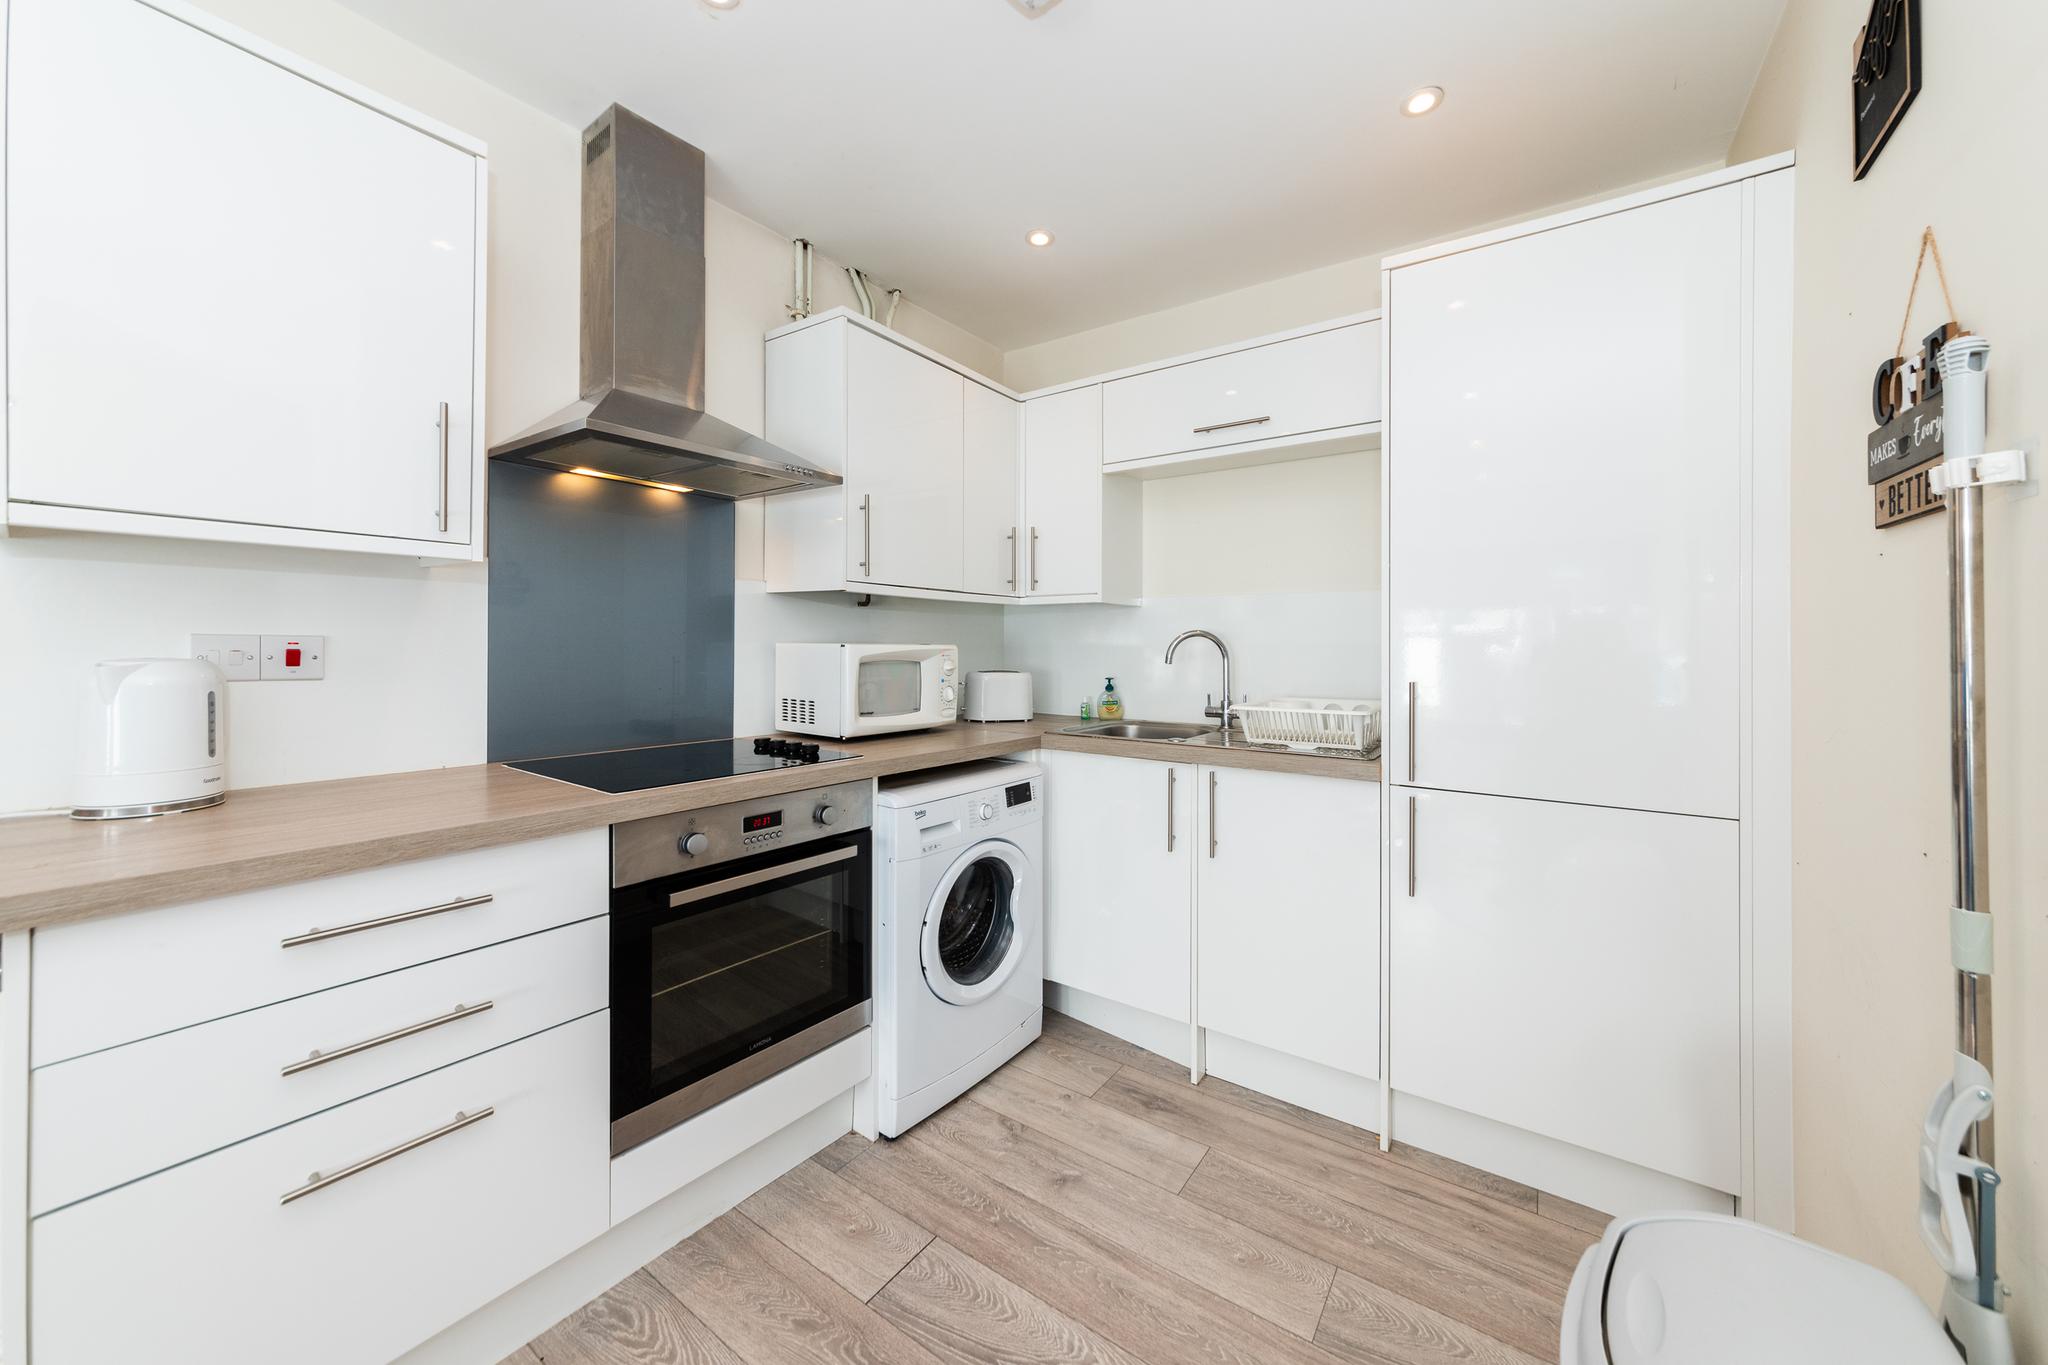 2 Beds| Fully Equipped Apartment | Reading Central3